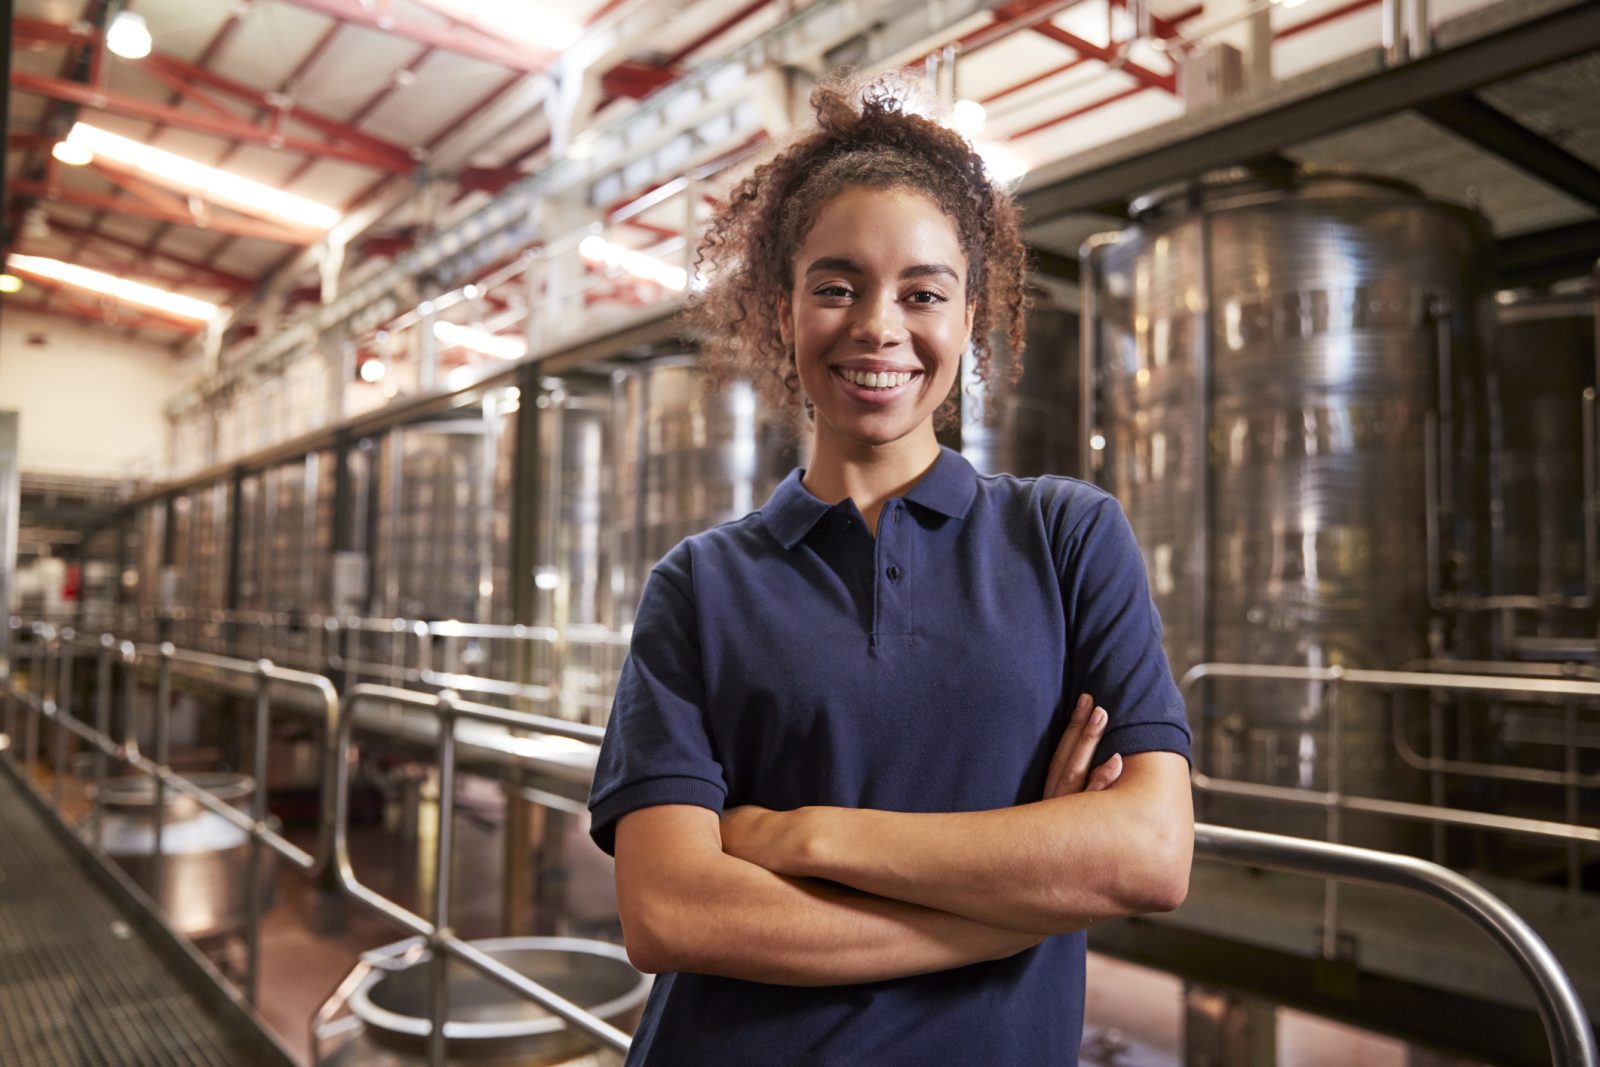 A portrait of a woman standing in front of large metal wine vats.